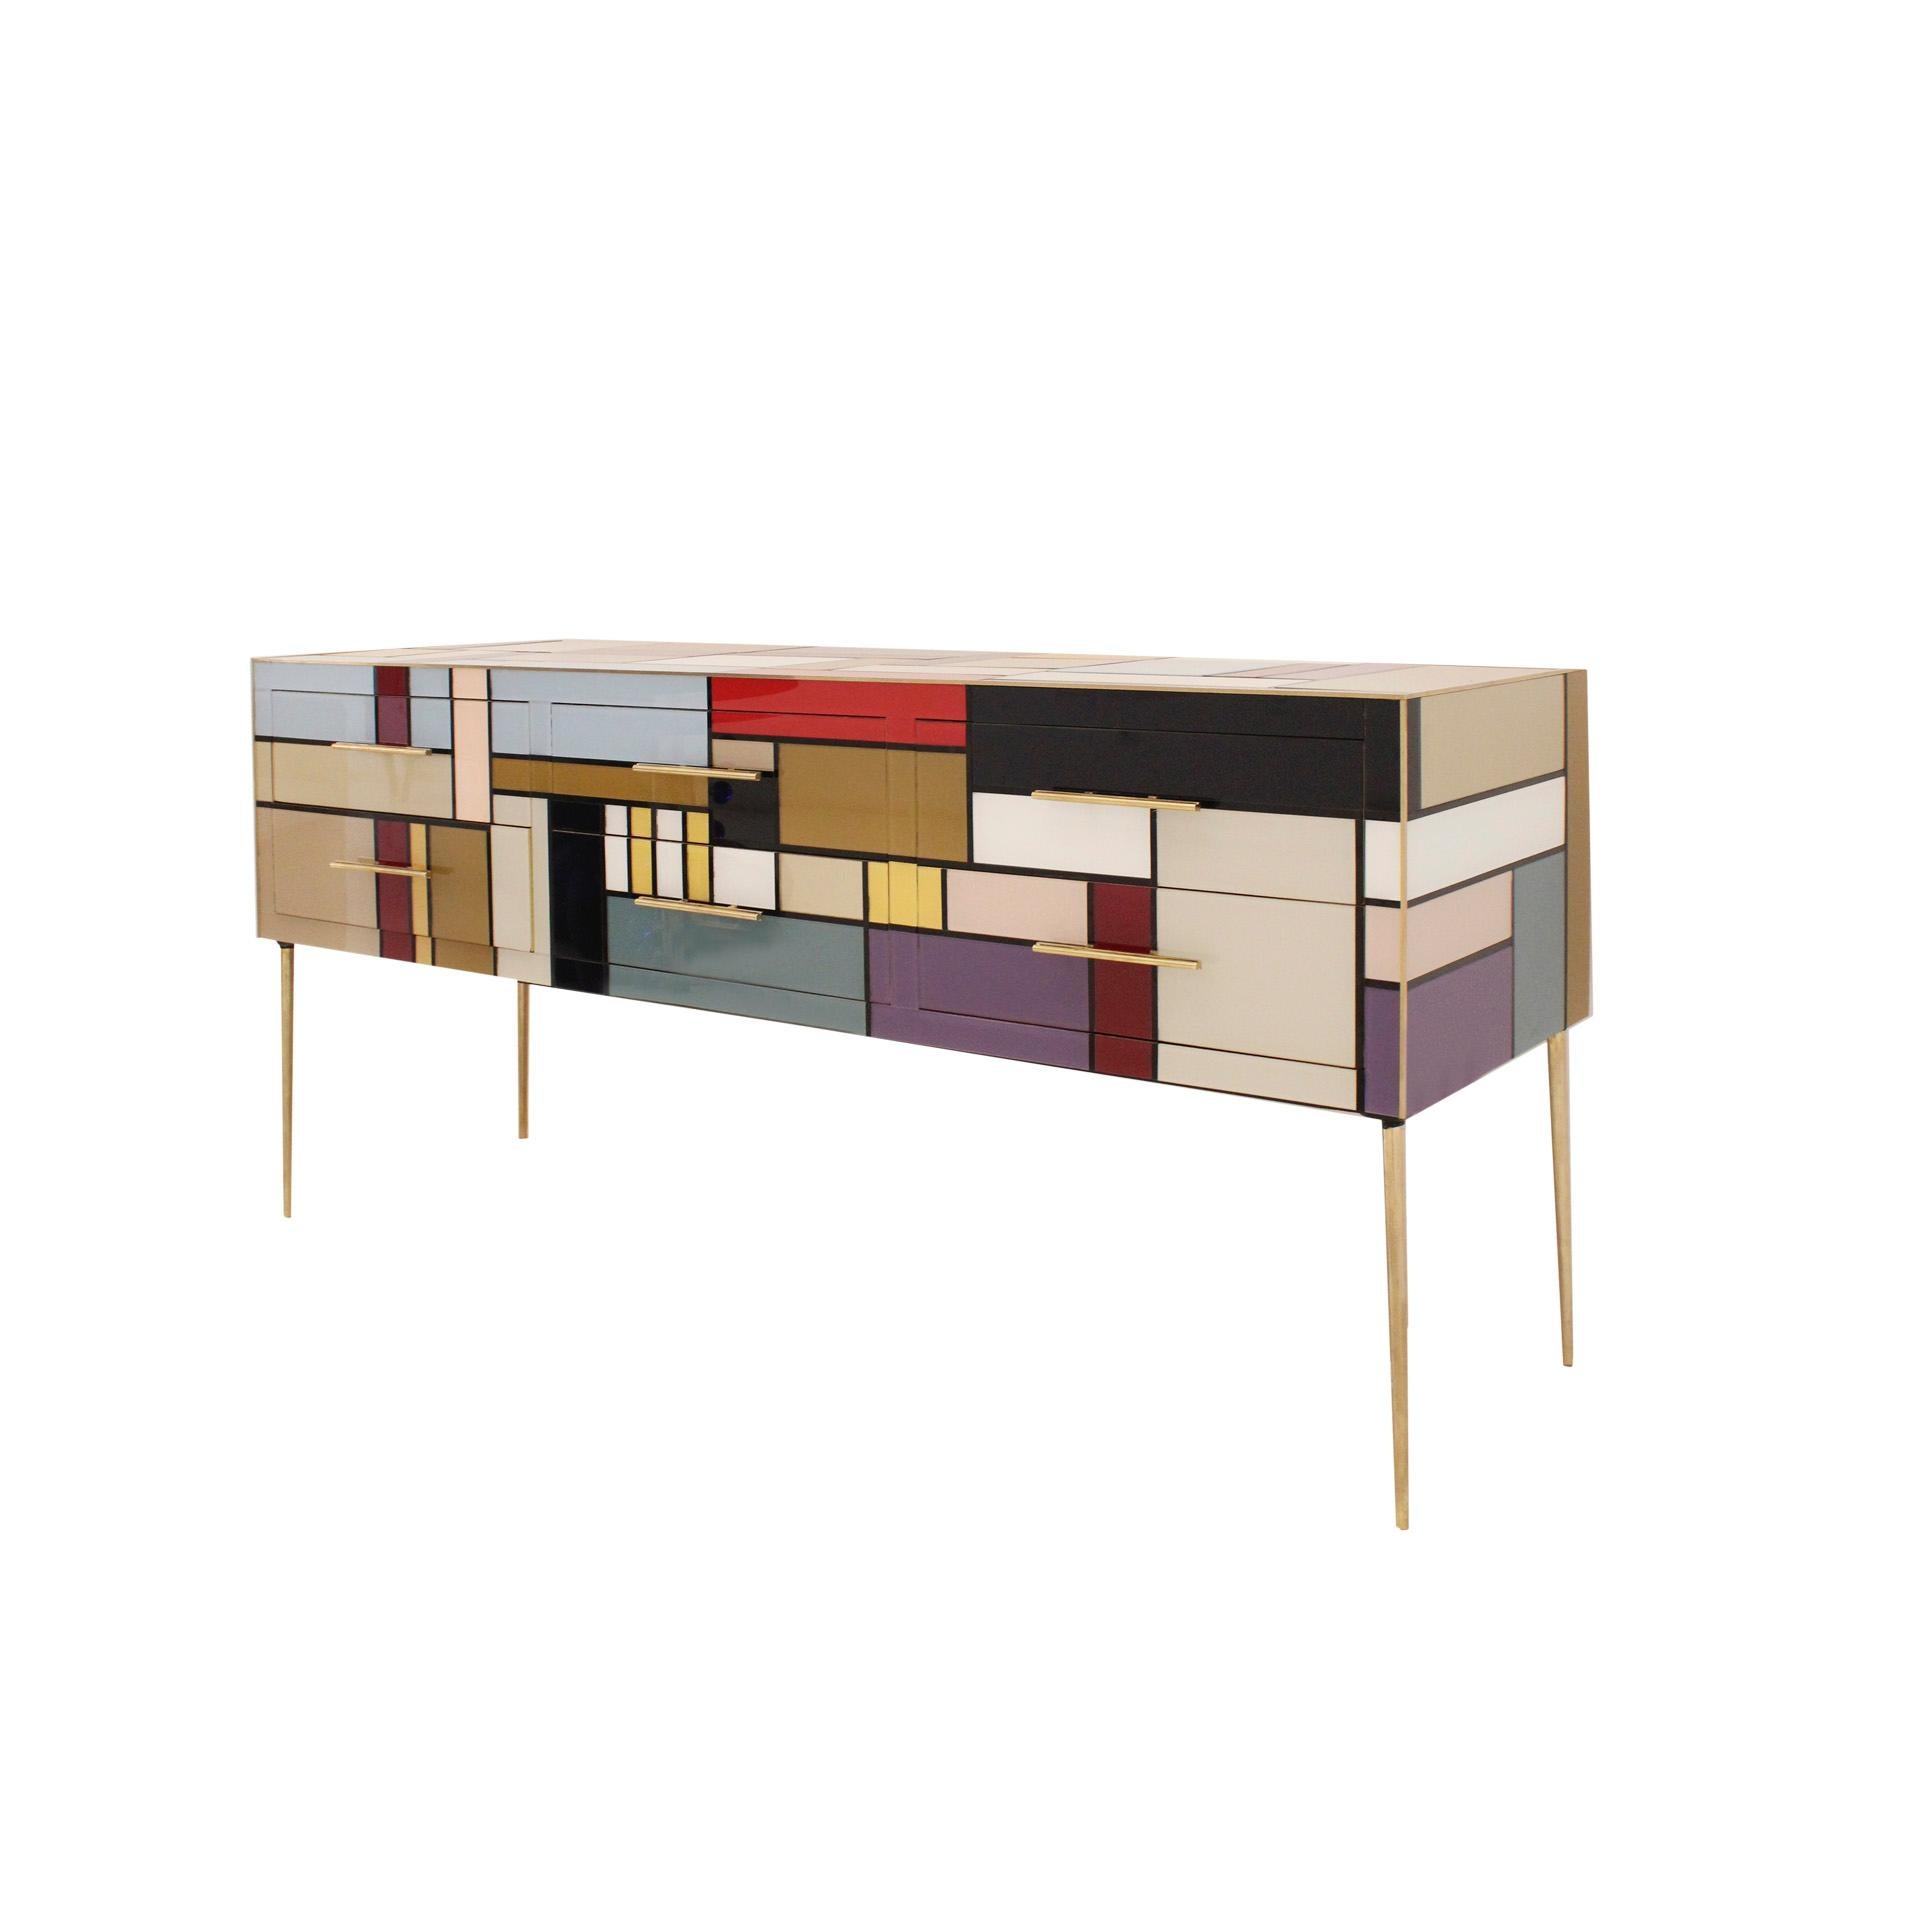 Italian sideboard with original structure from 50s. Composed of six drawers and six legs, with wooden structure covered in colored Murano glass, profiles, handles and feet in brass. Italian manufacture.

Take into account that the colors on the